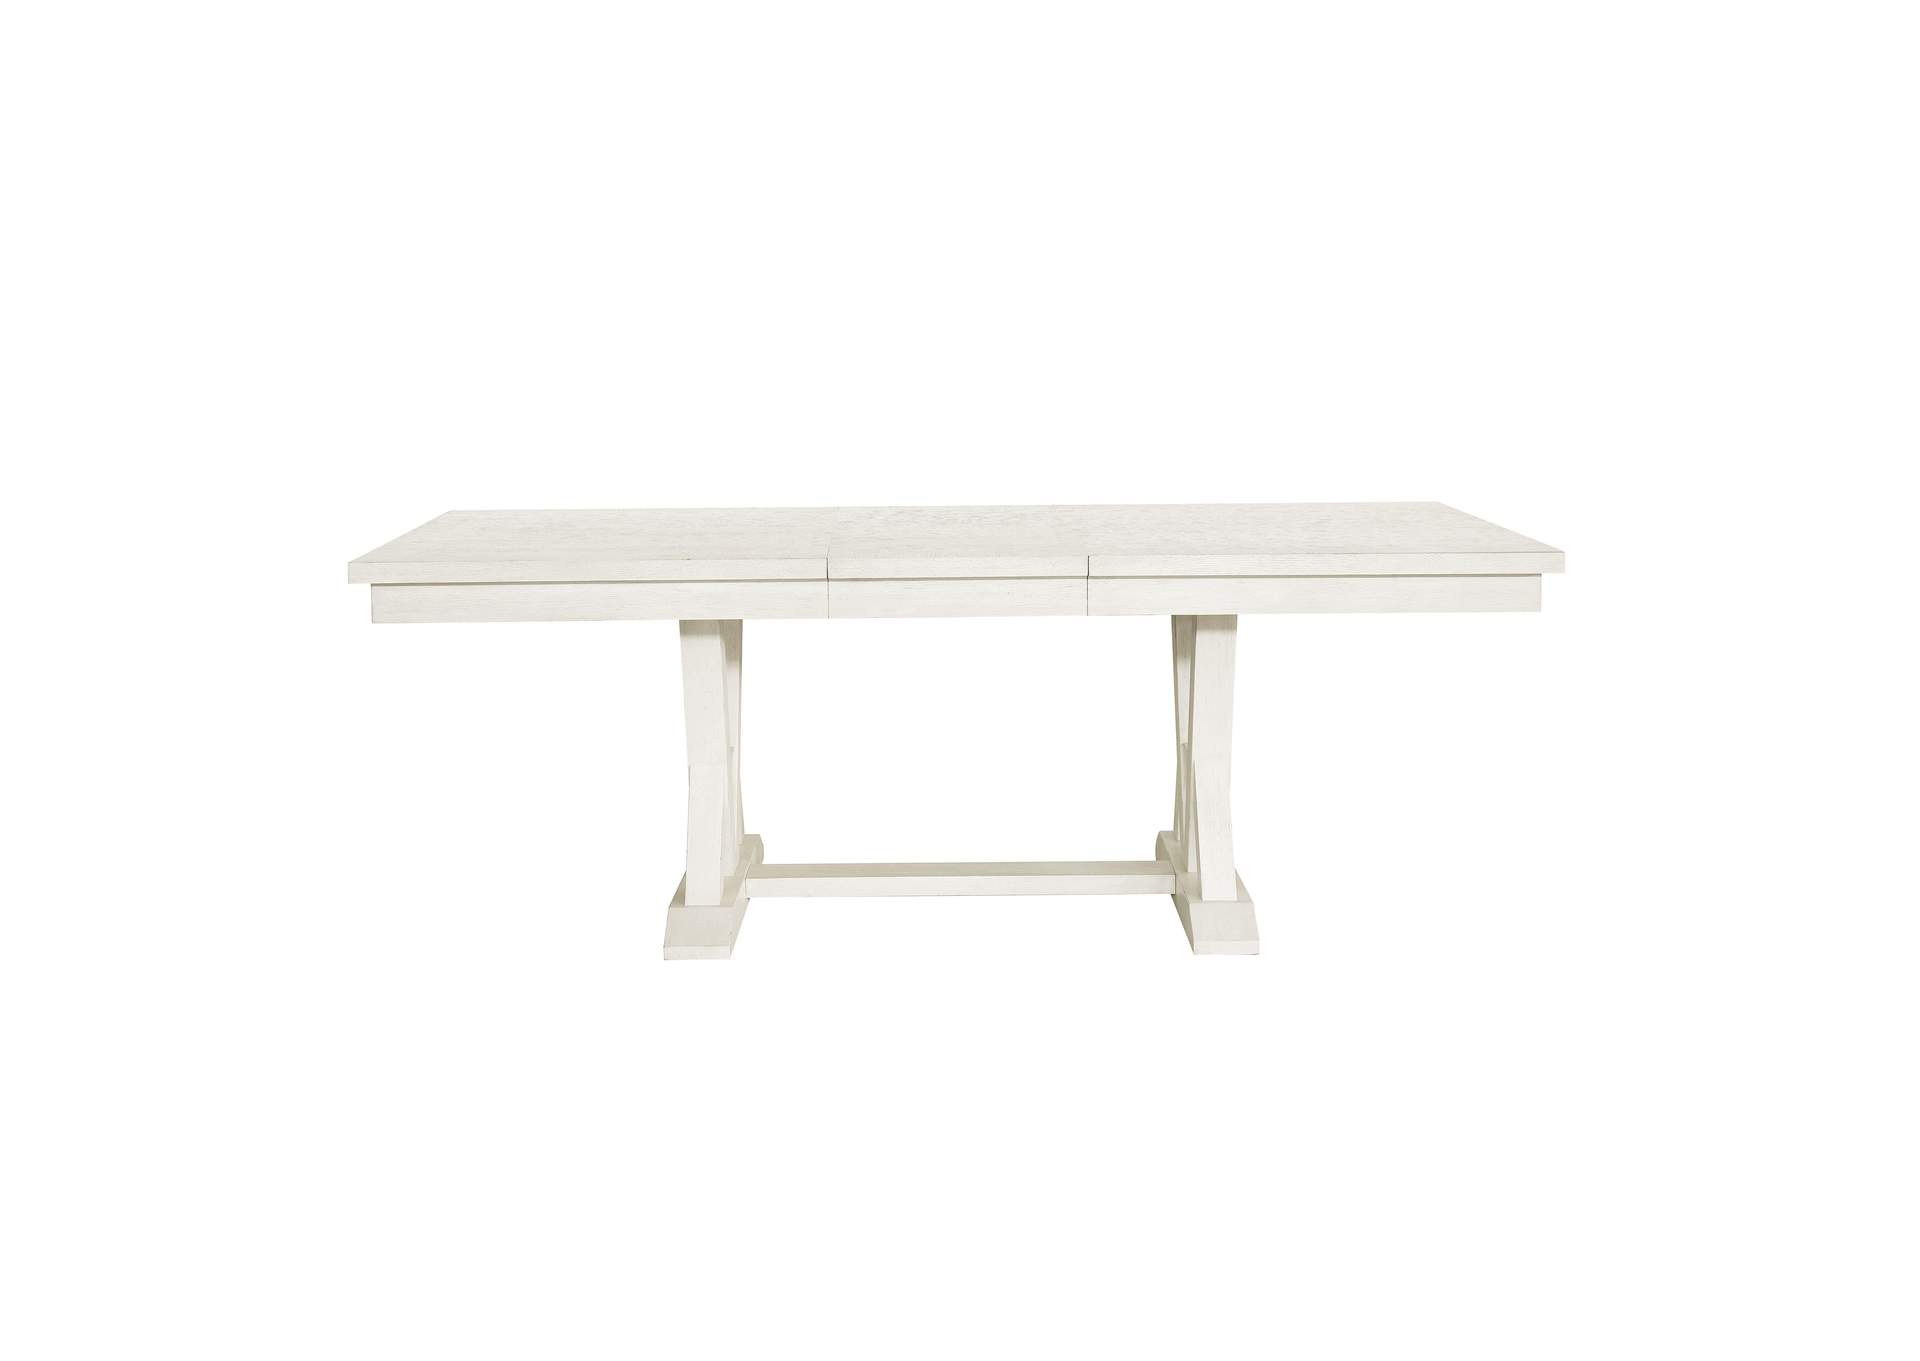 Maggie Valley Trestle Table with Extension Leaf,Pulaski Furniture